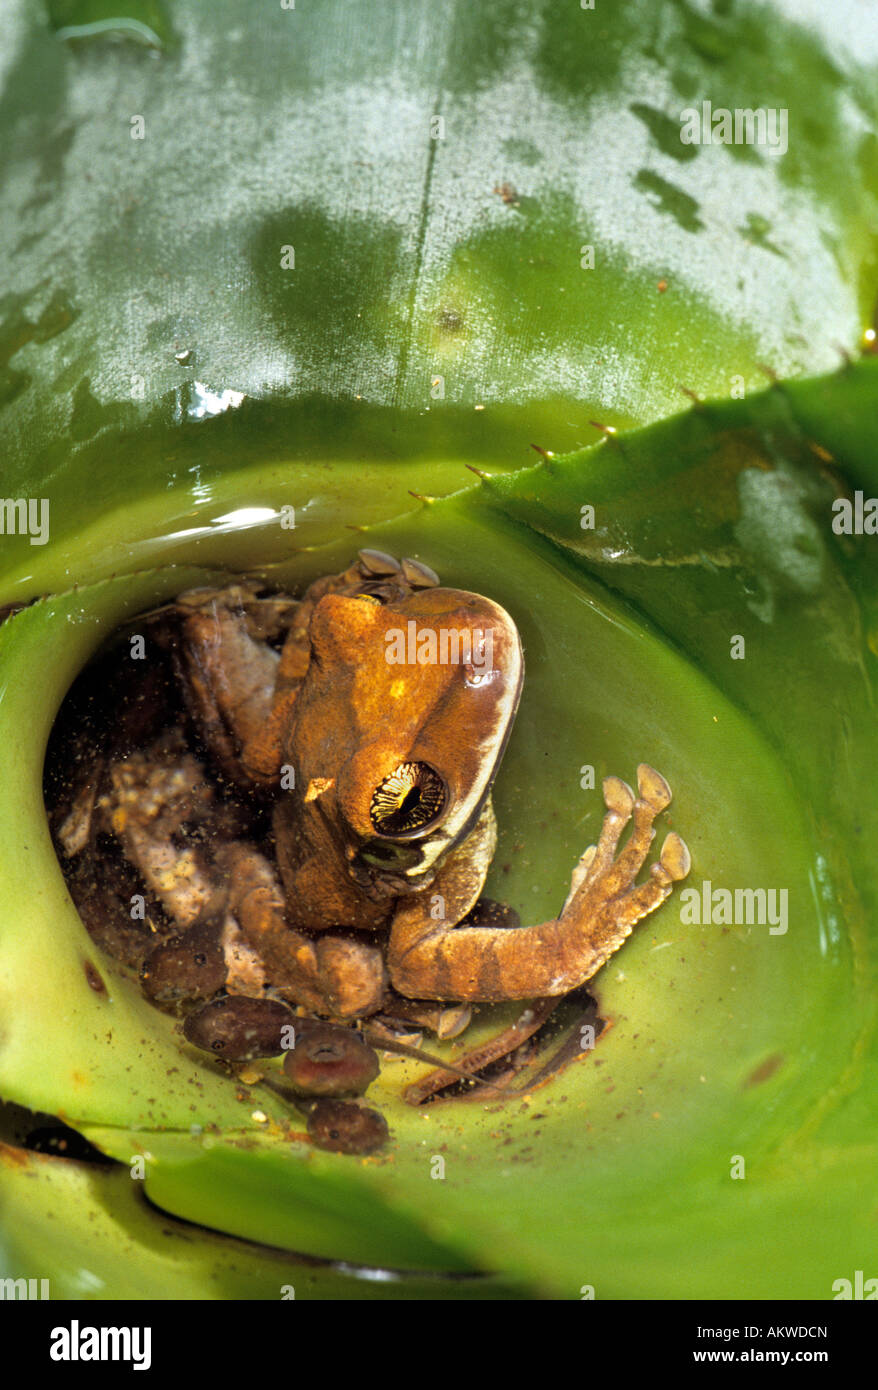 Amazon Rainforest Laughing frog Osteocephalus sp, with mother, tadpole and eggs. Stock Photo